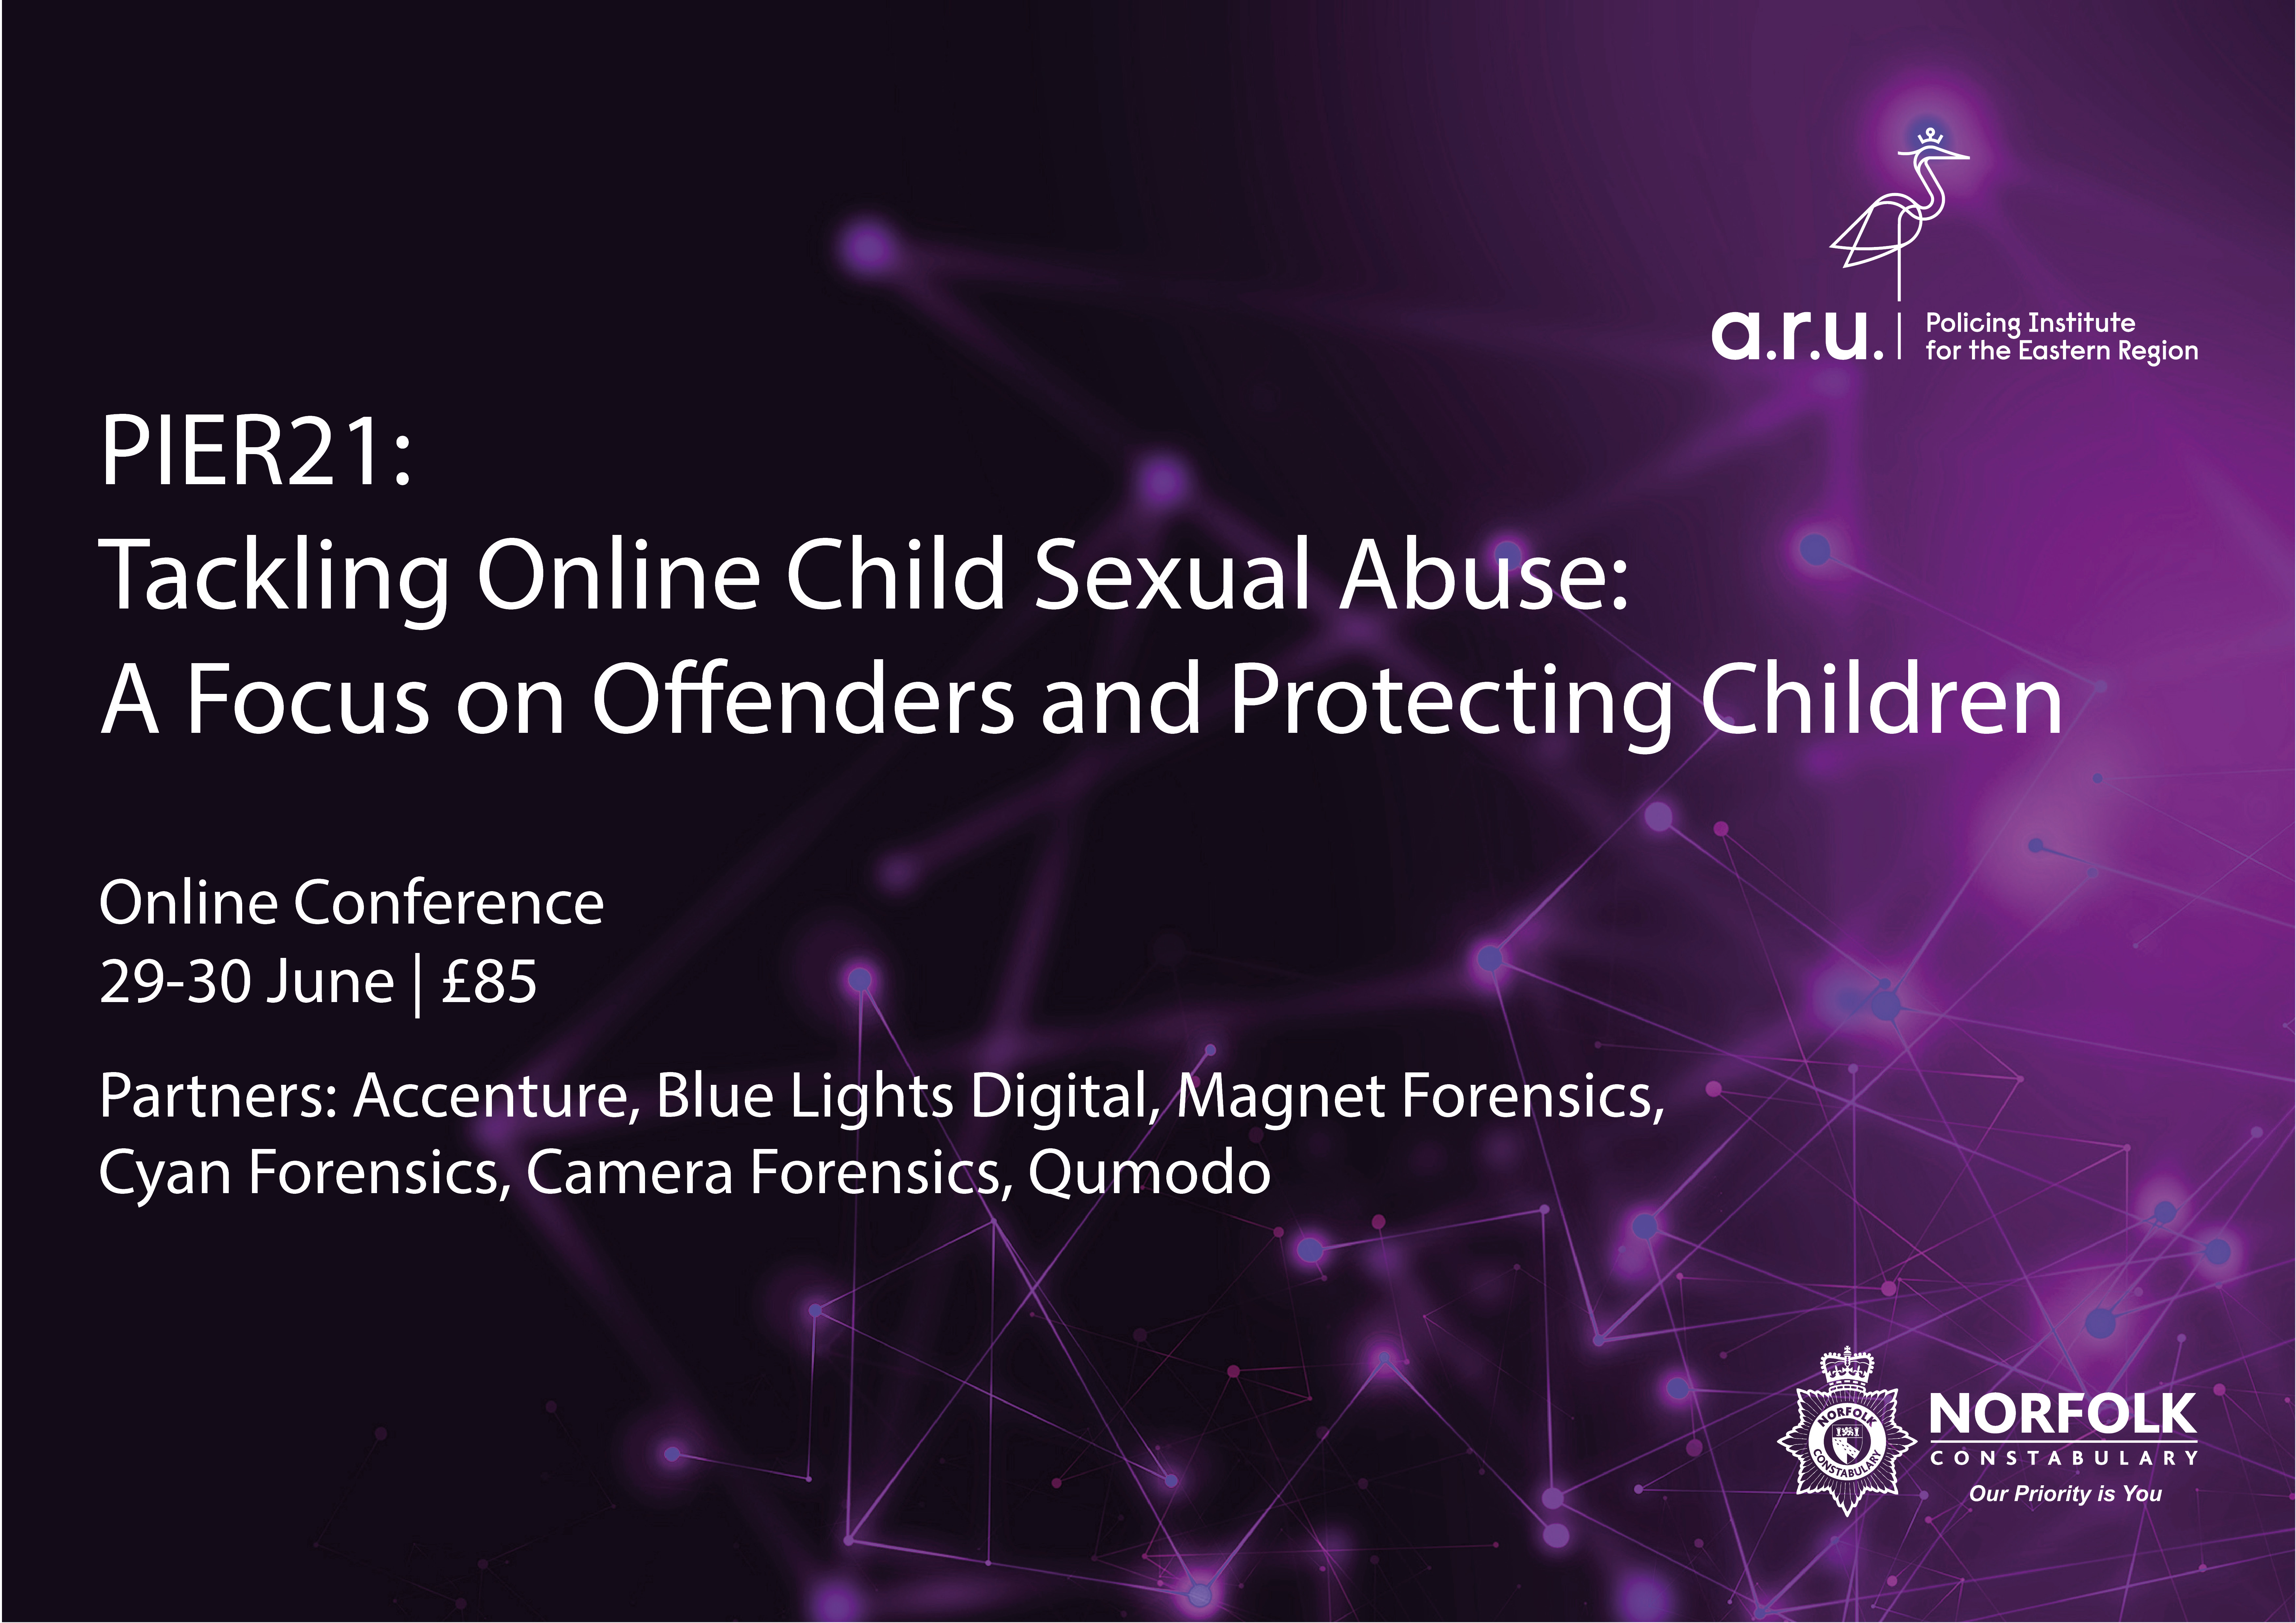 PIER21: Tackling Online Child Sexual Abuse: A focus on offenders and protecting children event poster.